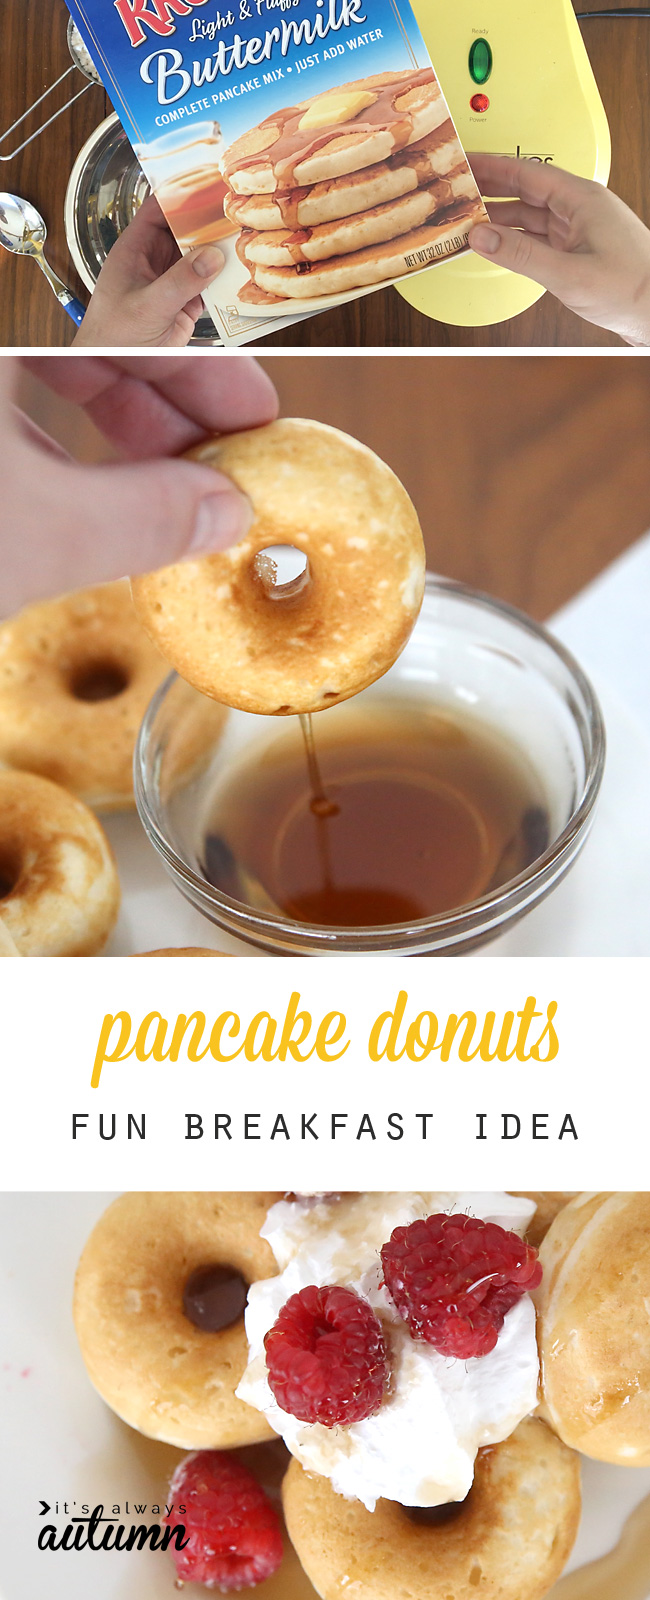 Pancake mix and donut maker; pancake donuts with syrup